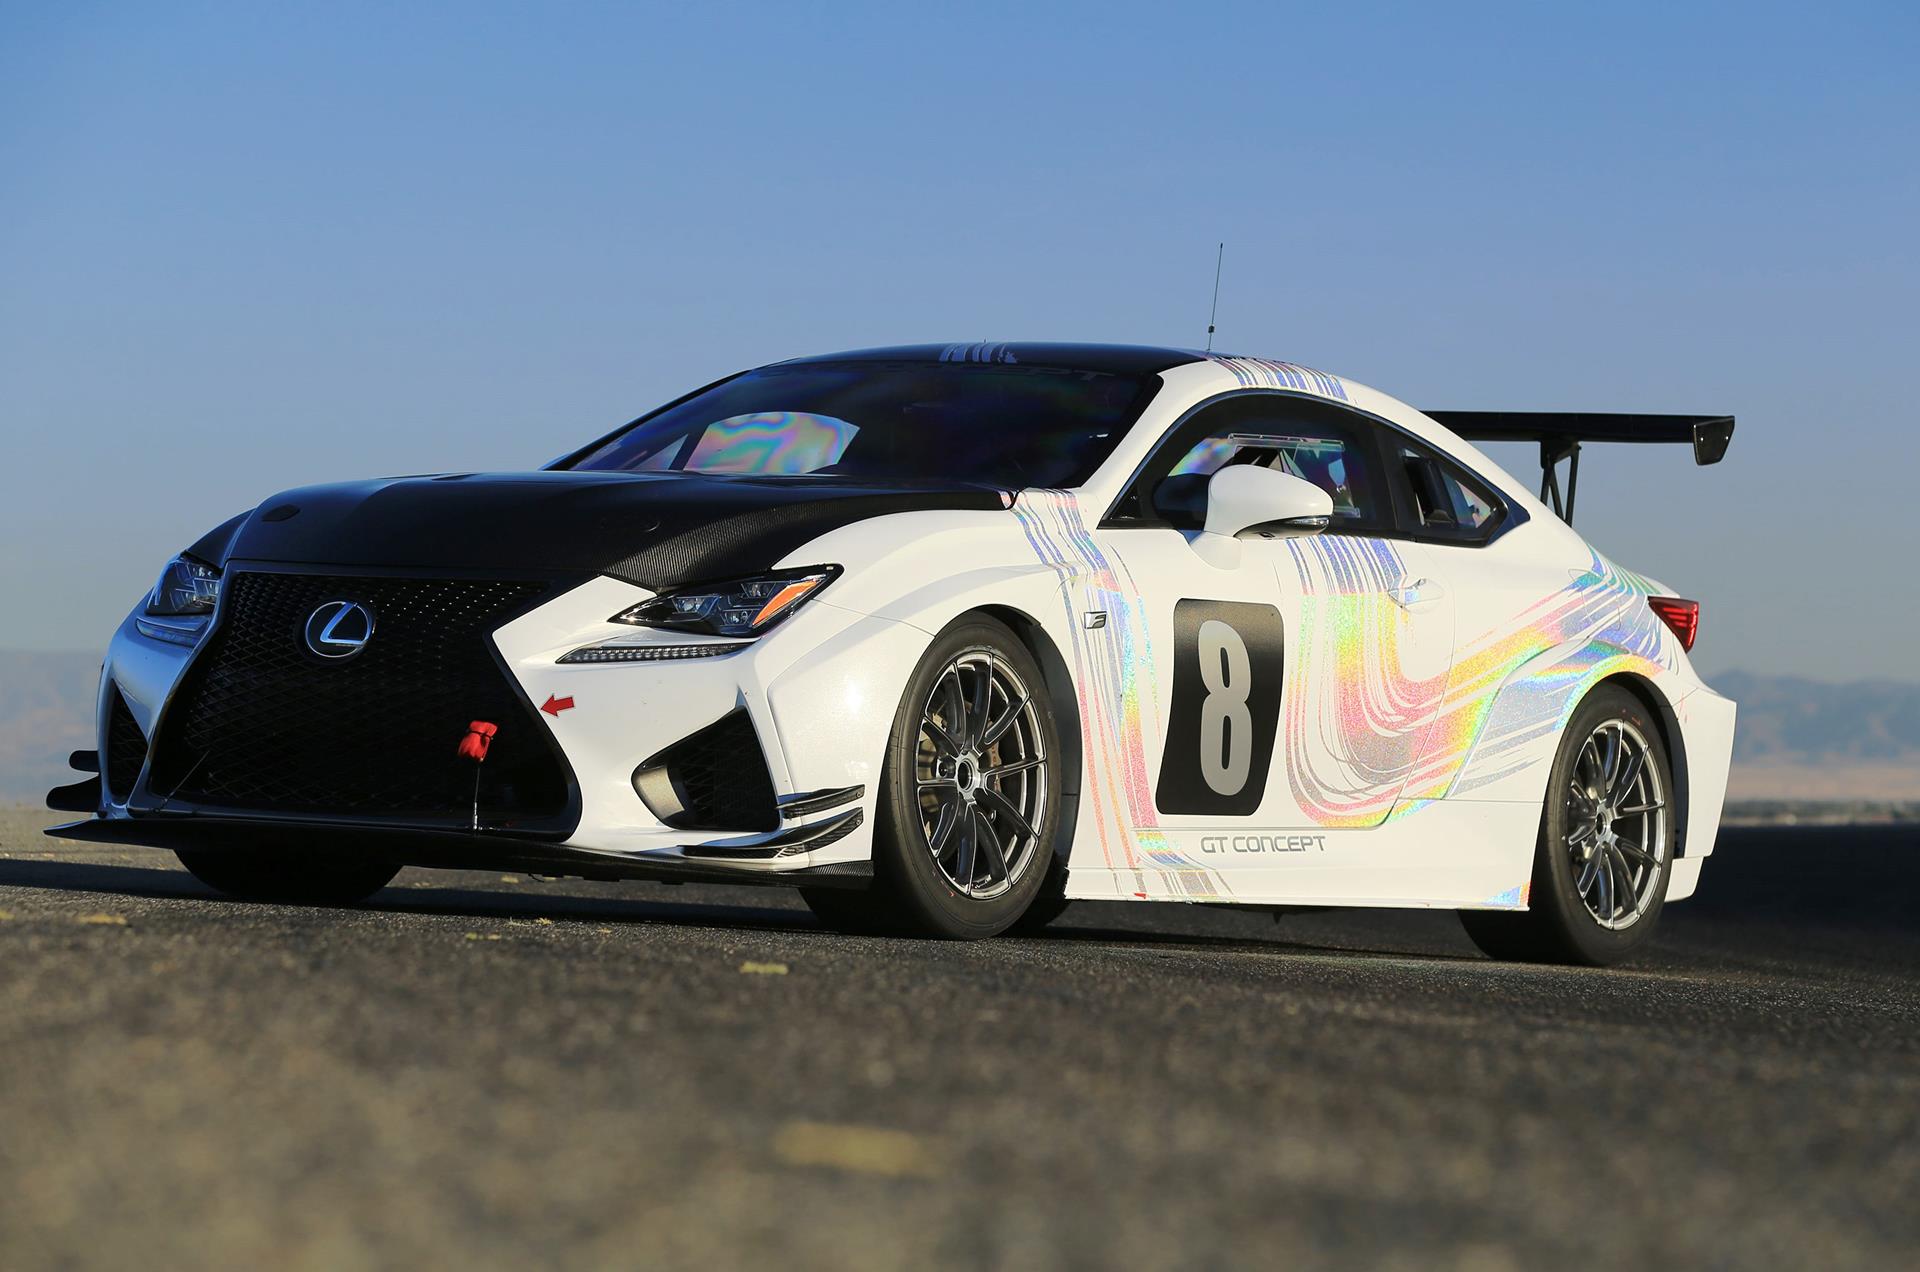 2015 Lexus Rc F Gt Concept News And Information Research And Pricing